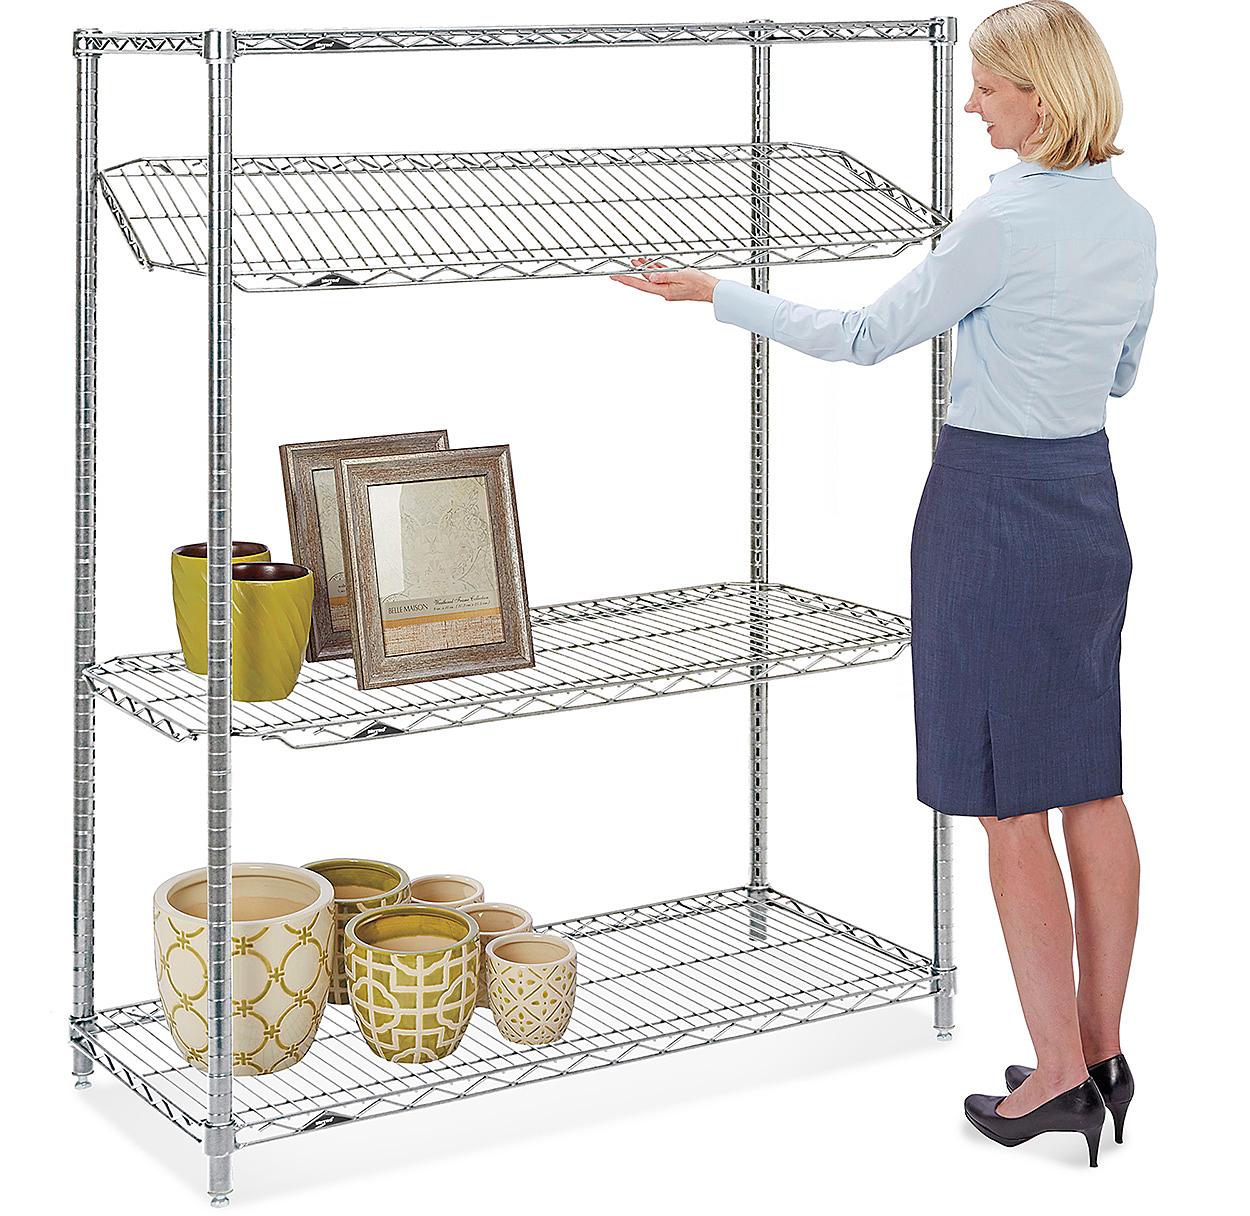 Quick Adjust Wire Shelving